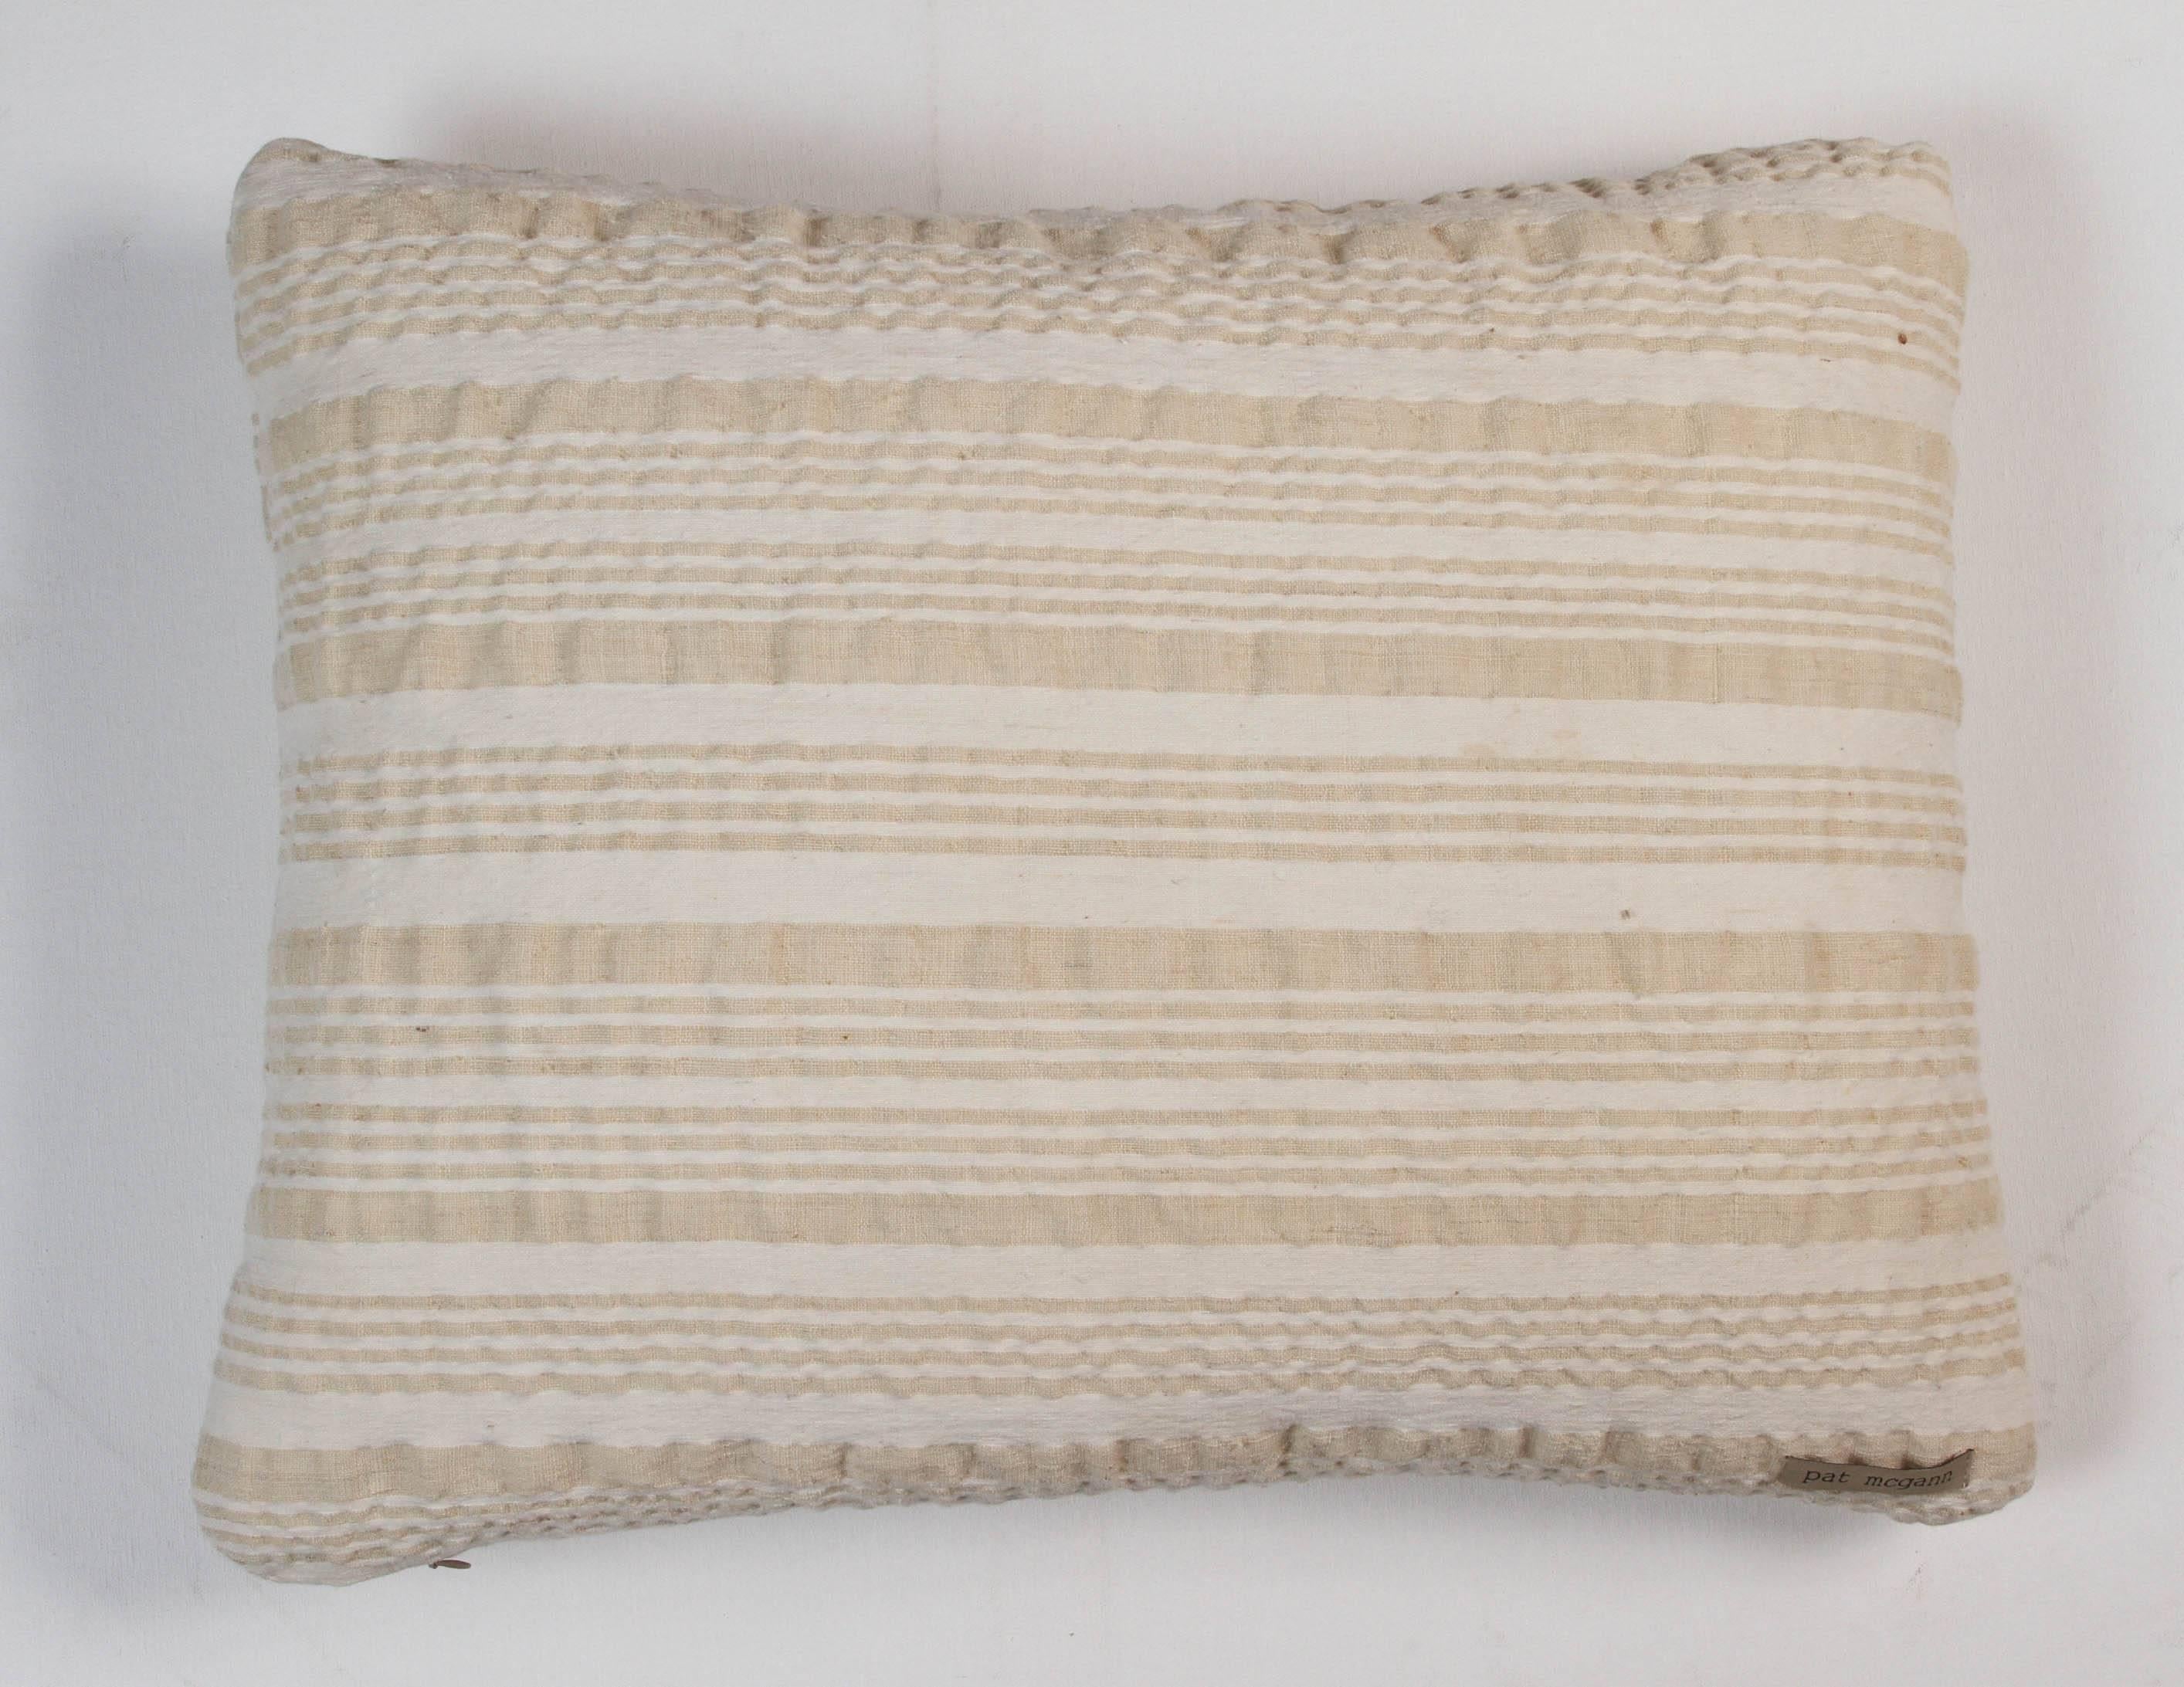 Double Sided Handwoven E. European Textile Pillow In Good Condition For Sale In Los Angeles, CA